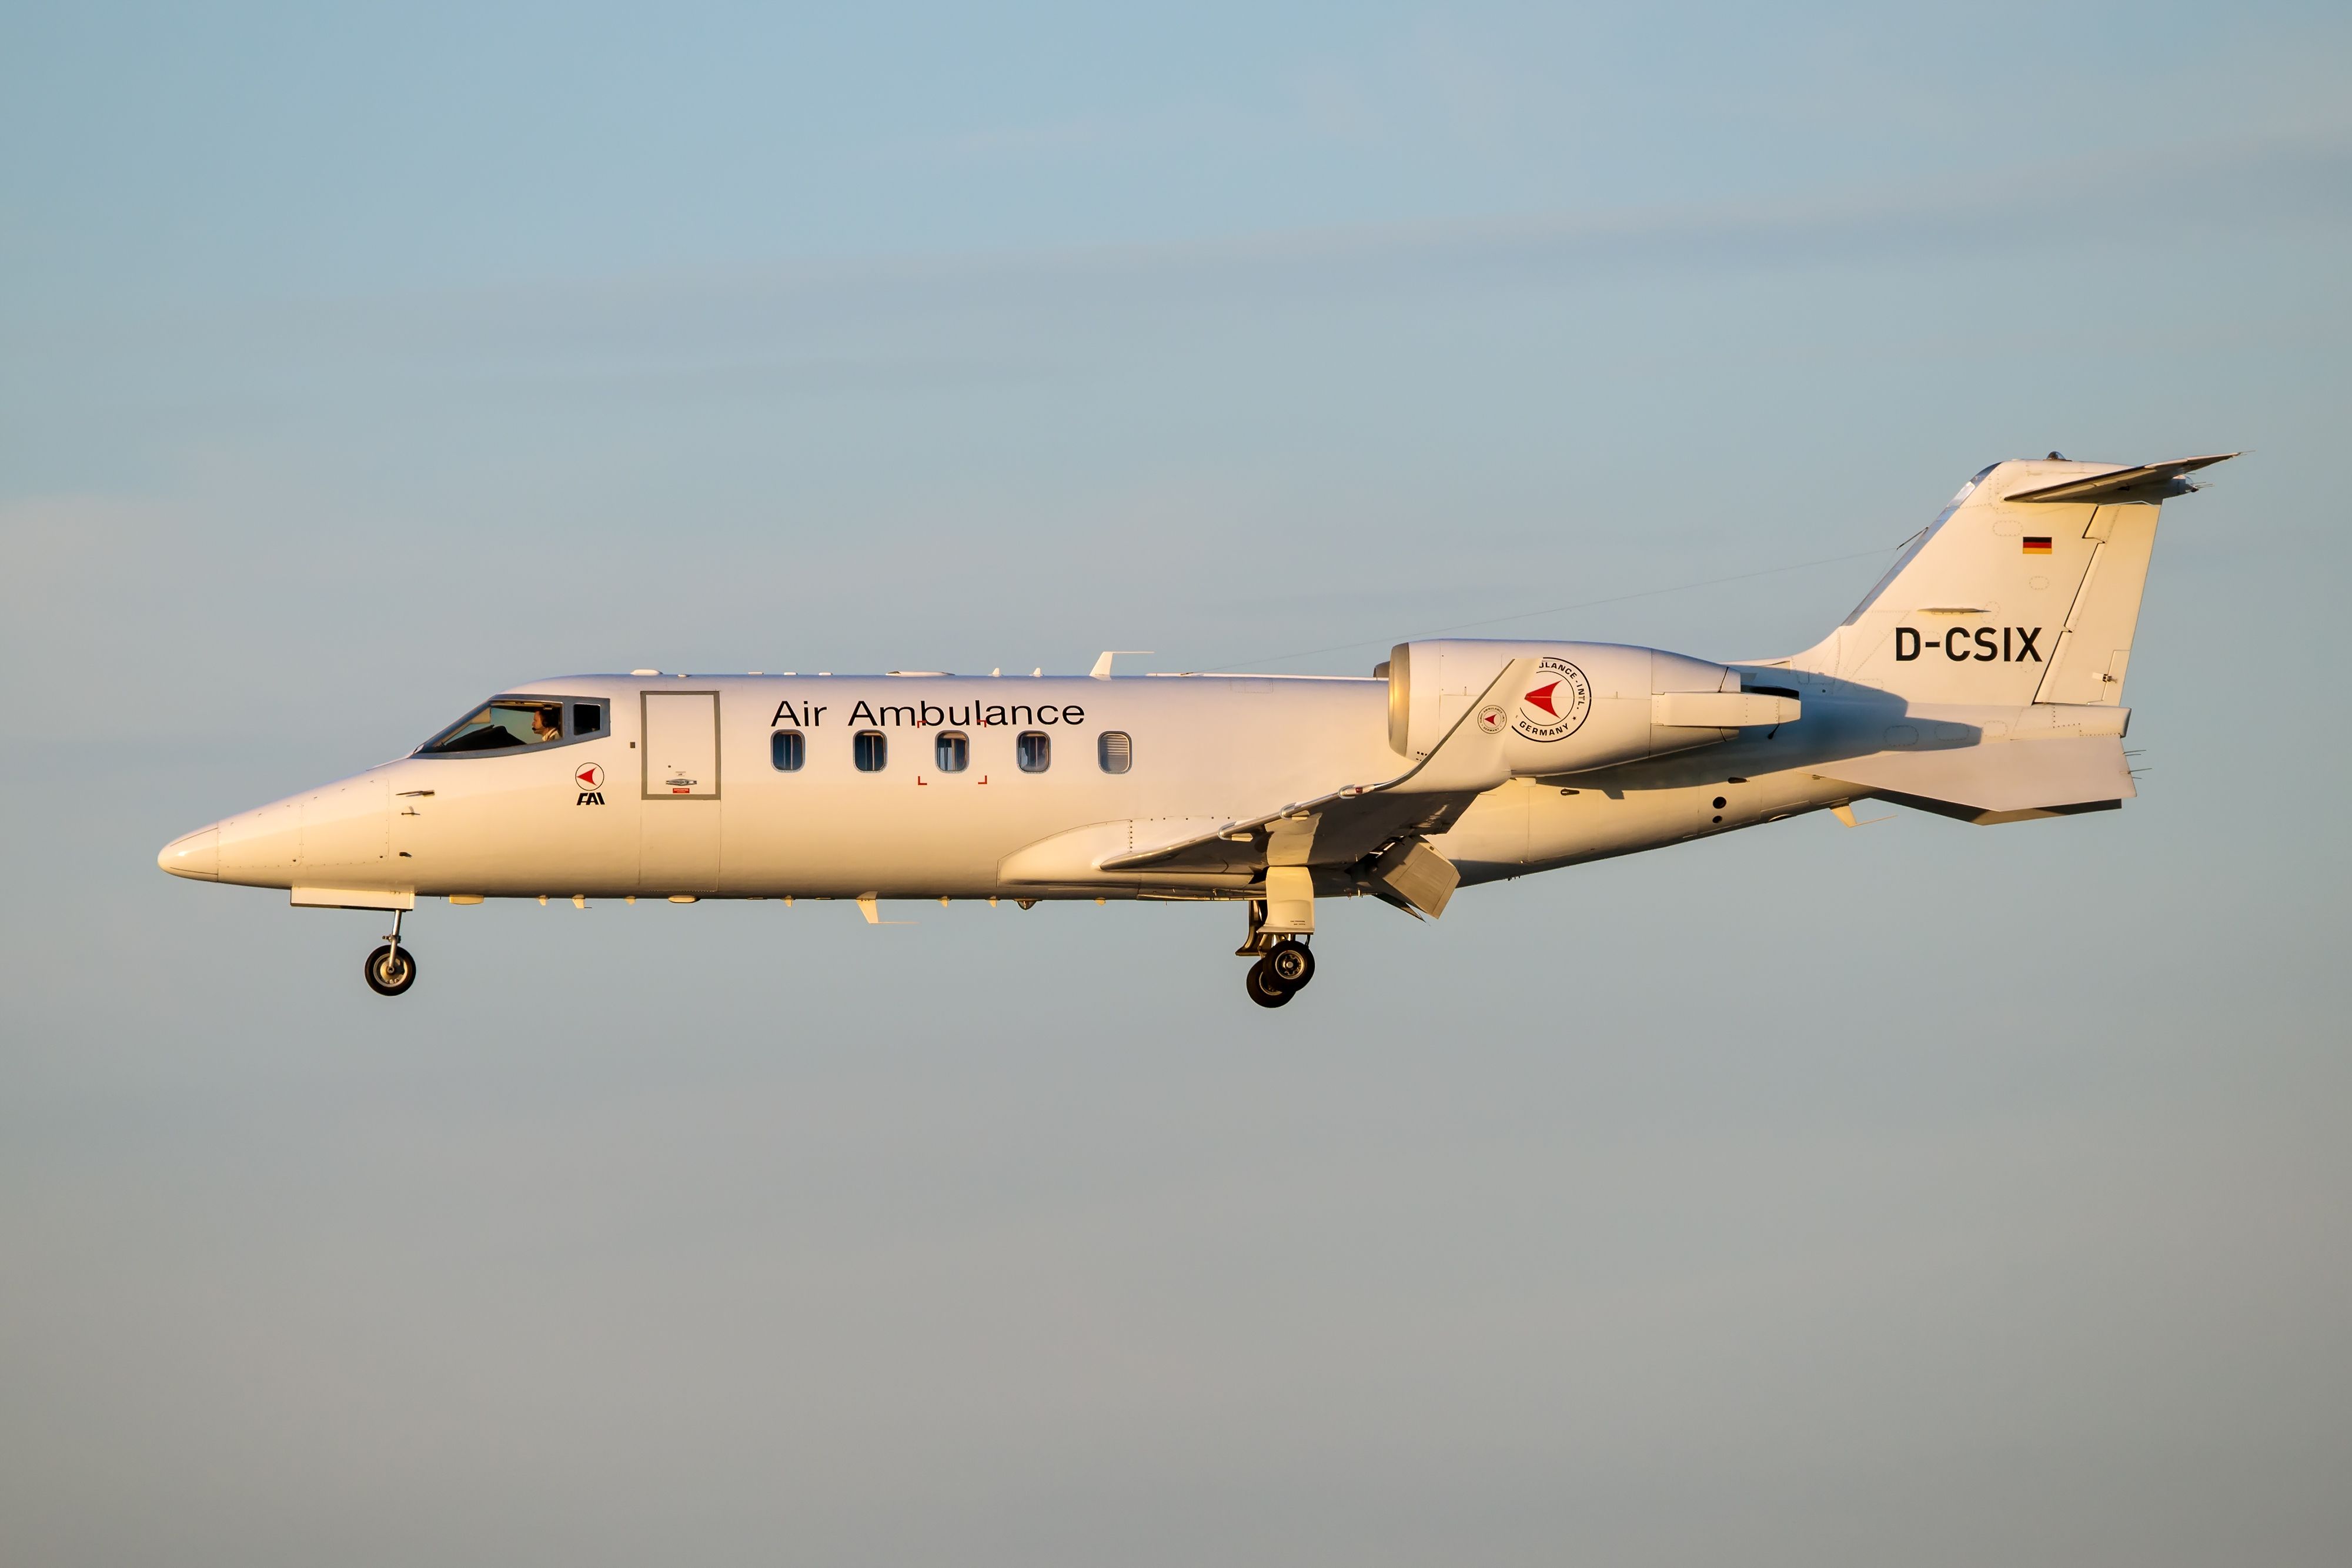 An Air Ambulance Learjet 60 flying in the sky.